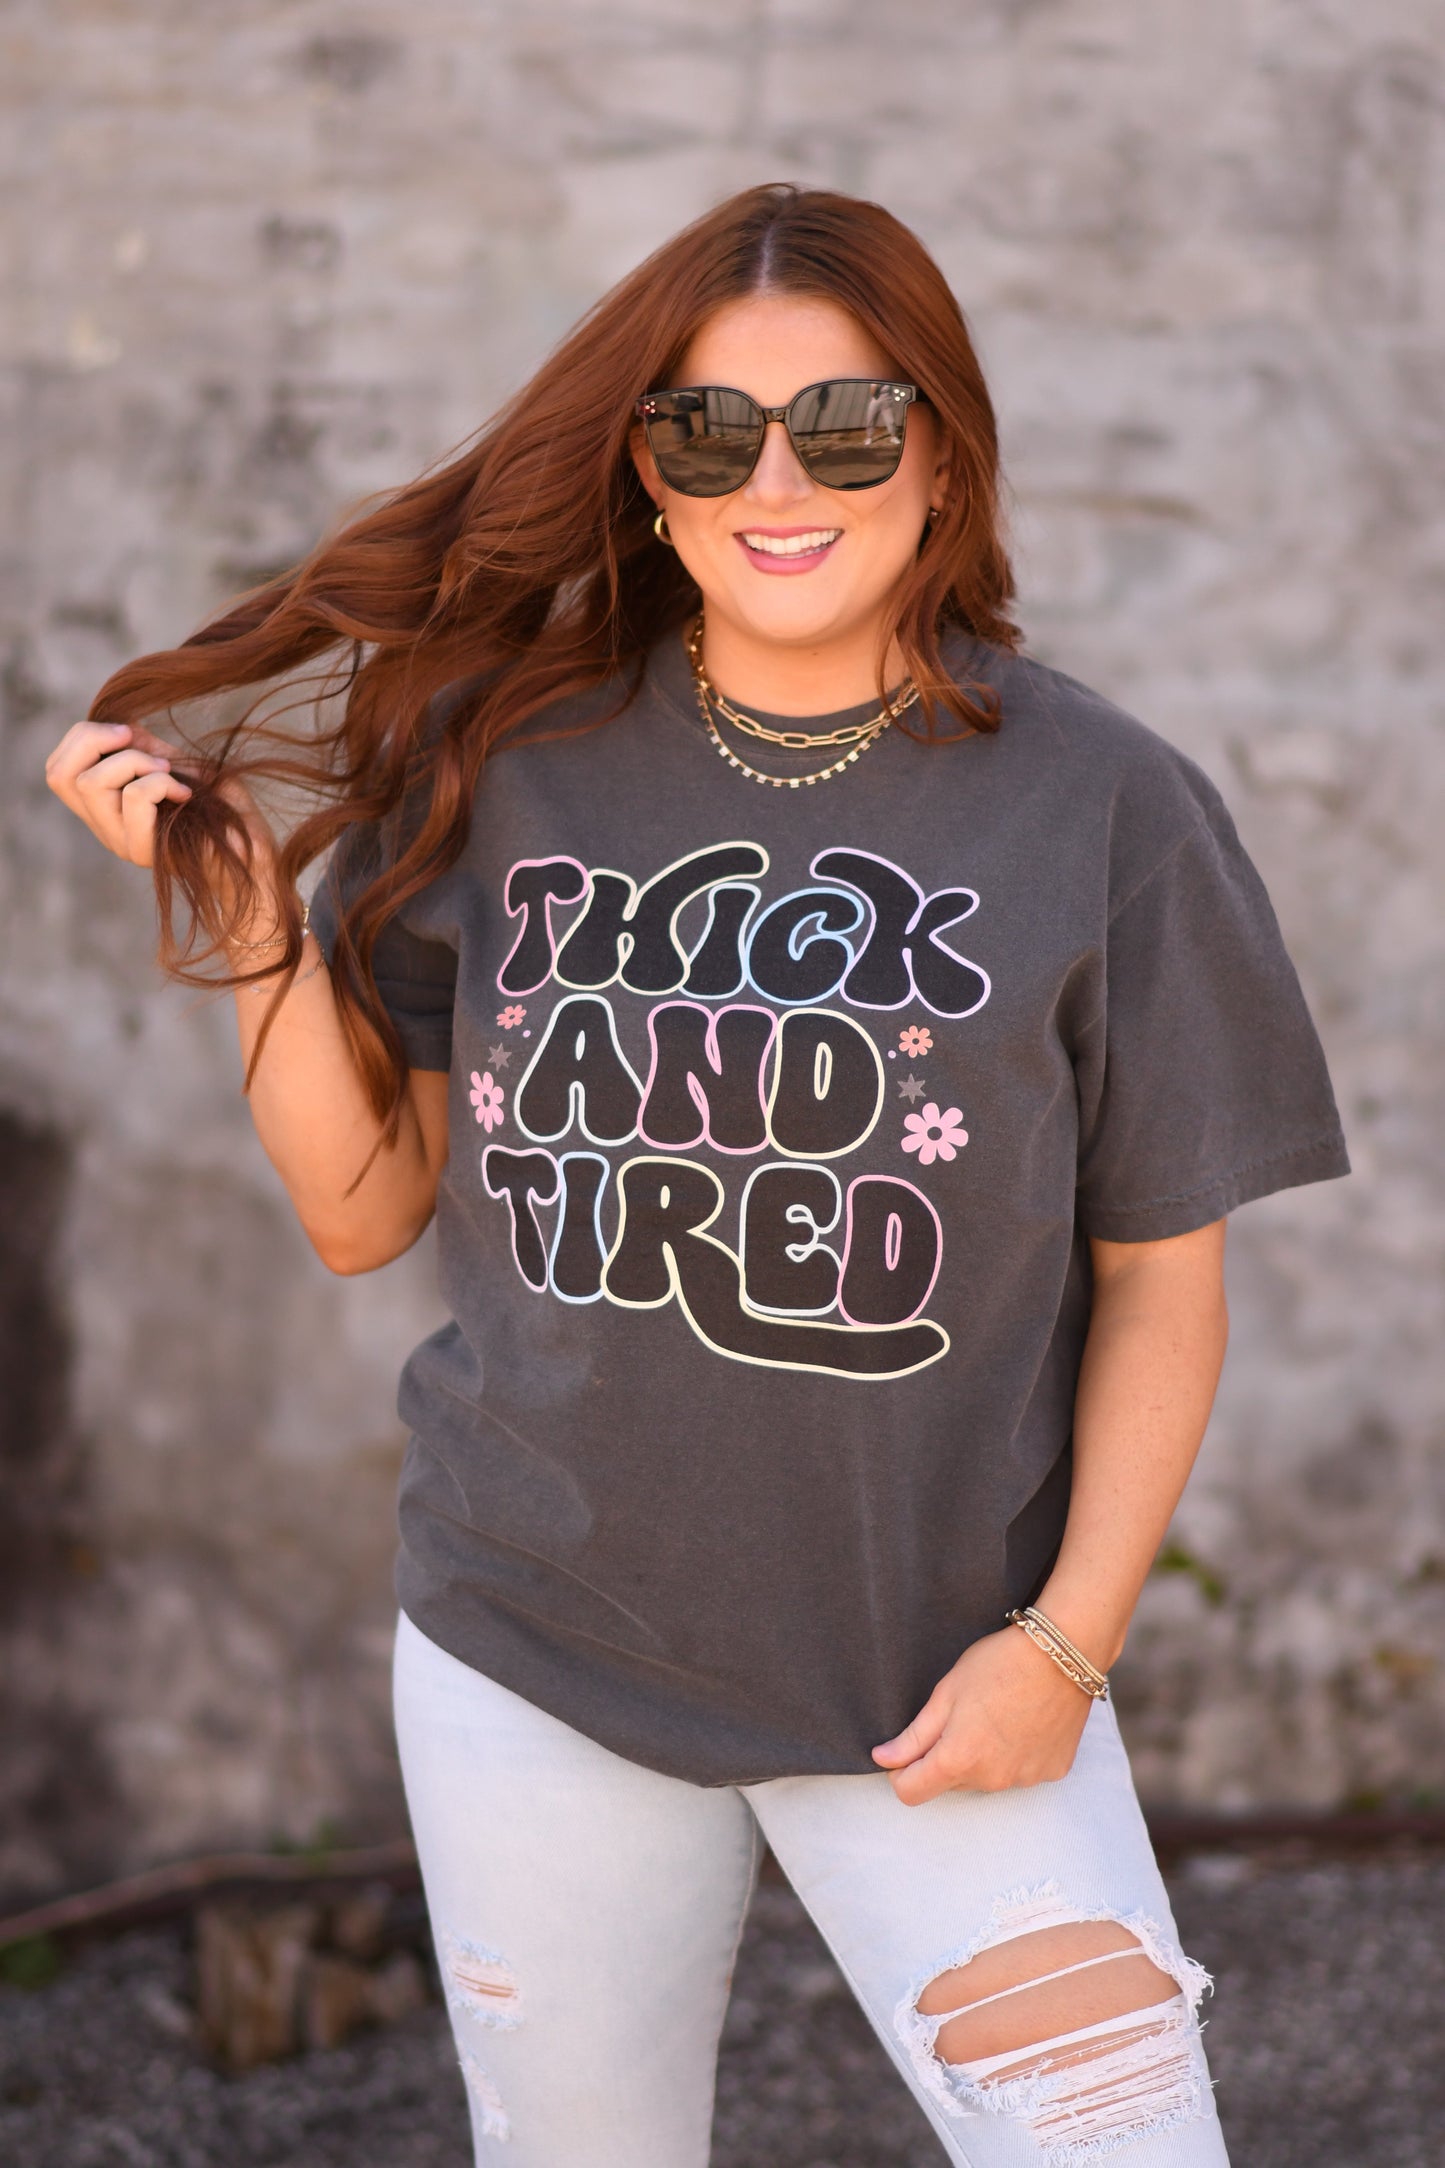 Thick and tired tee